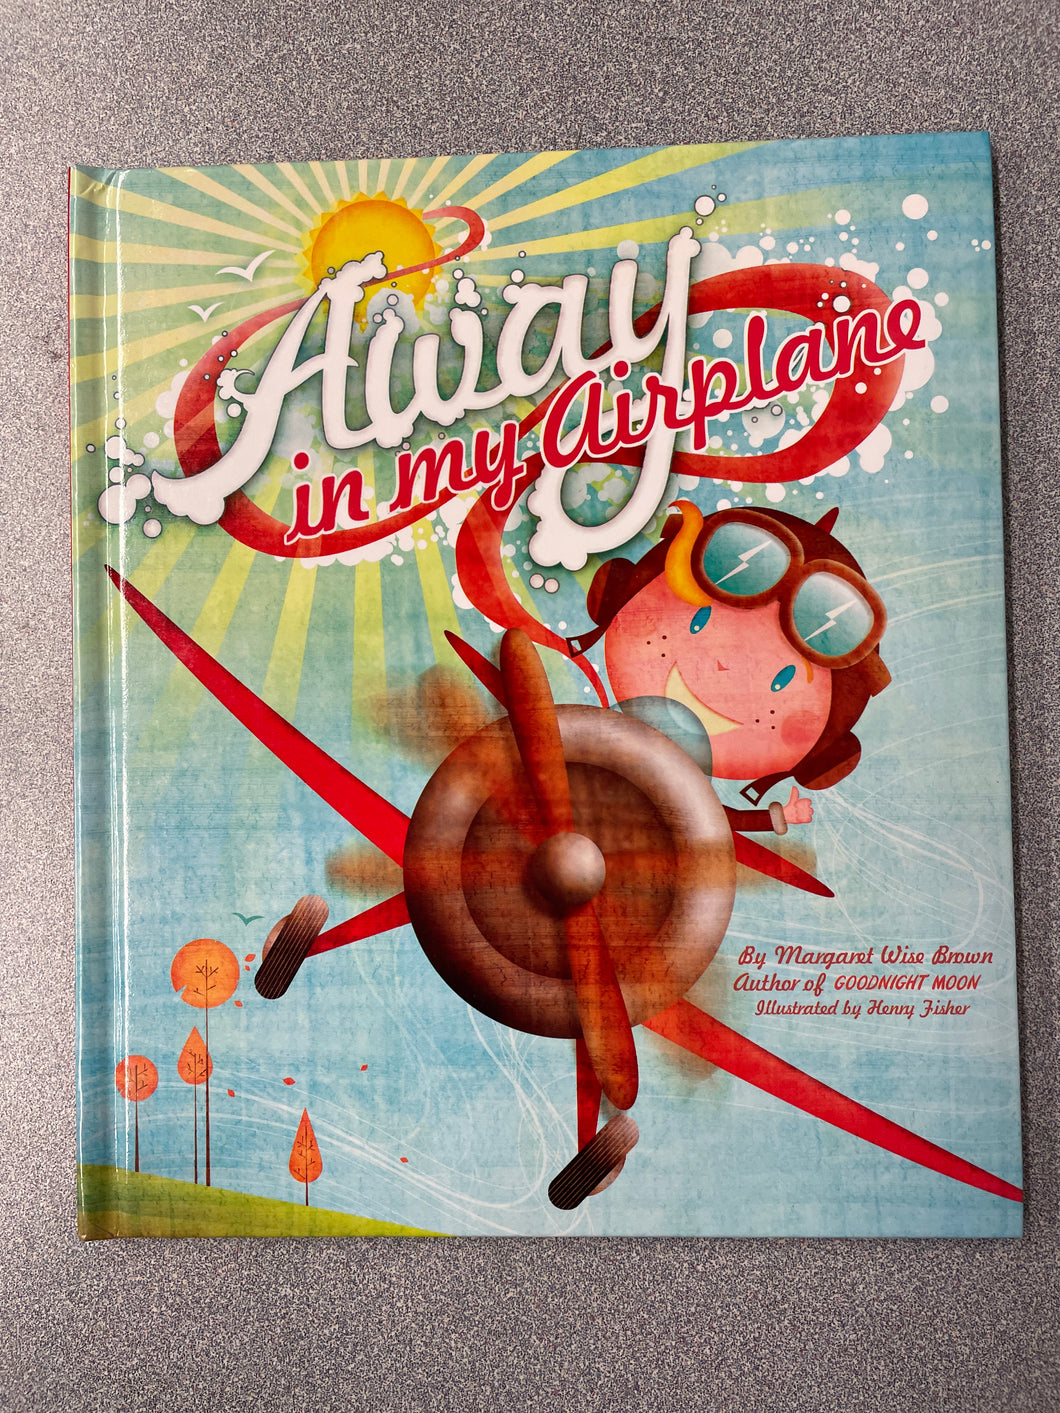 Brown, Margaret Wise, Away in my Airplane [2015] CP 4/24